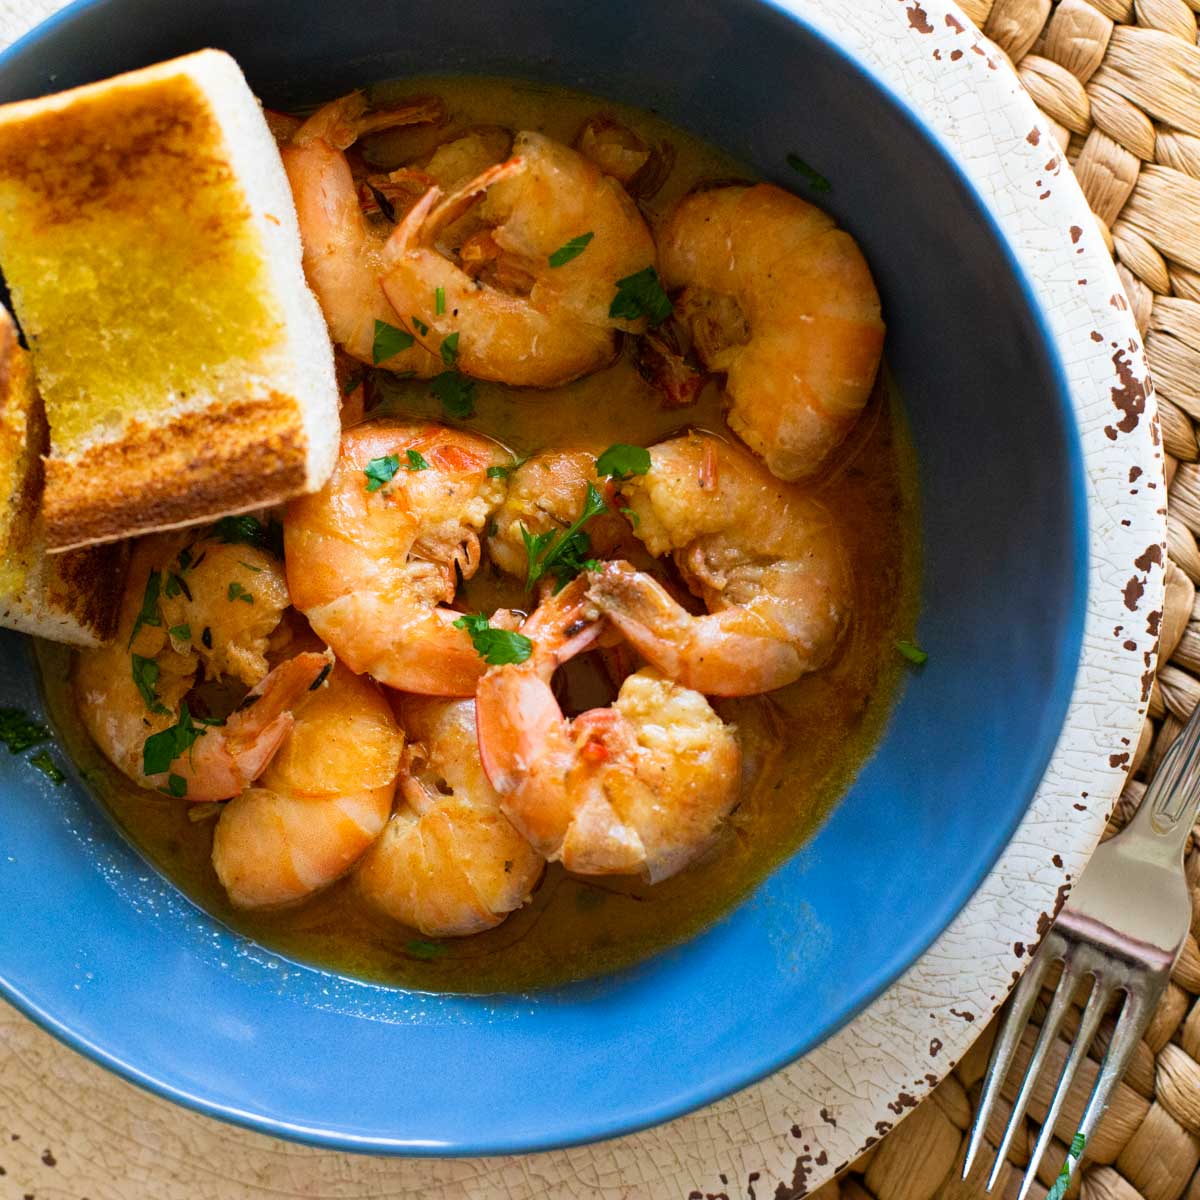 A big bowl of garlic butter shrimp with garlic bread for dunking.